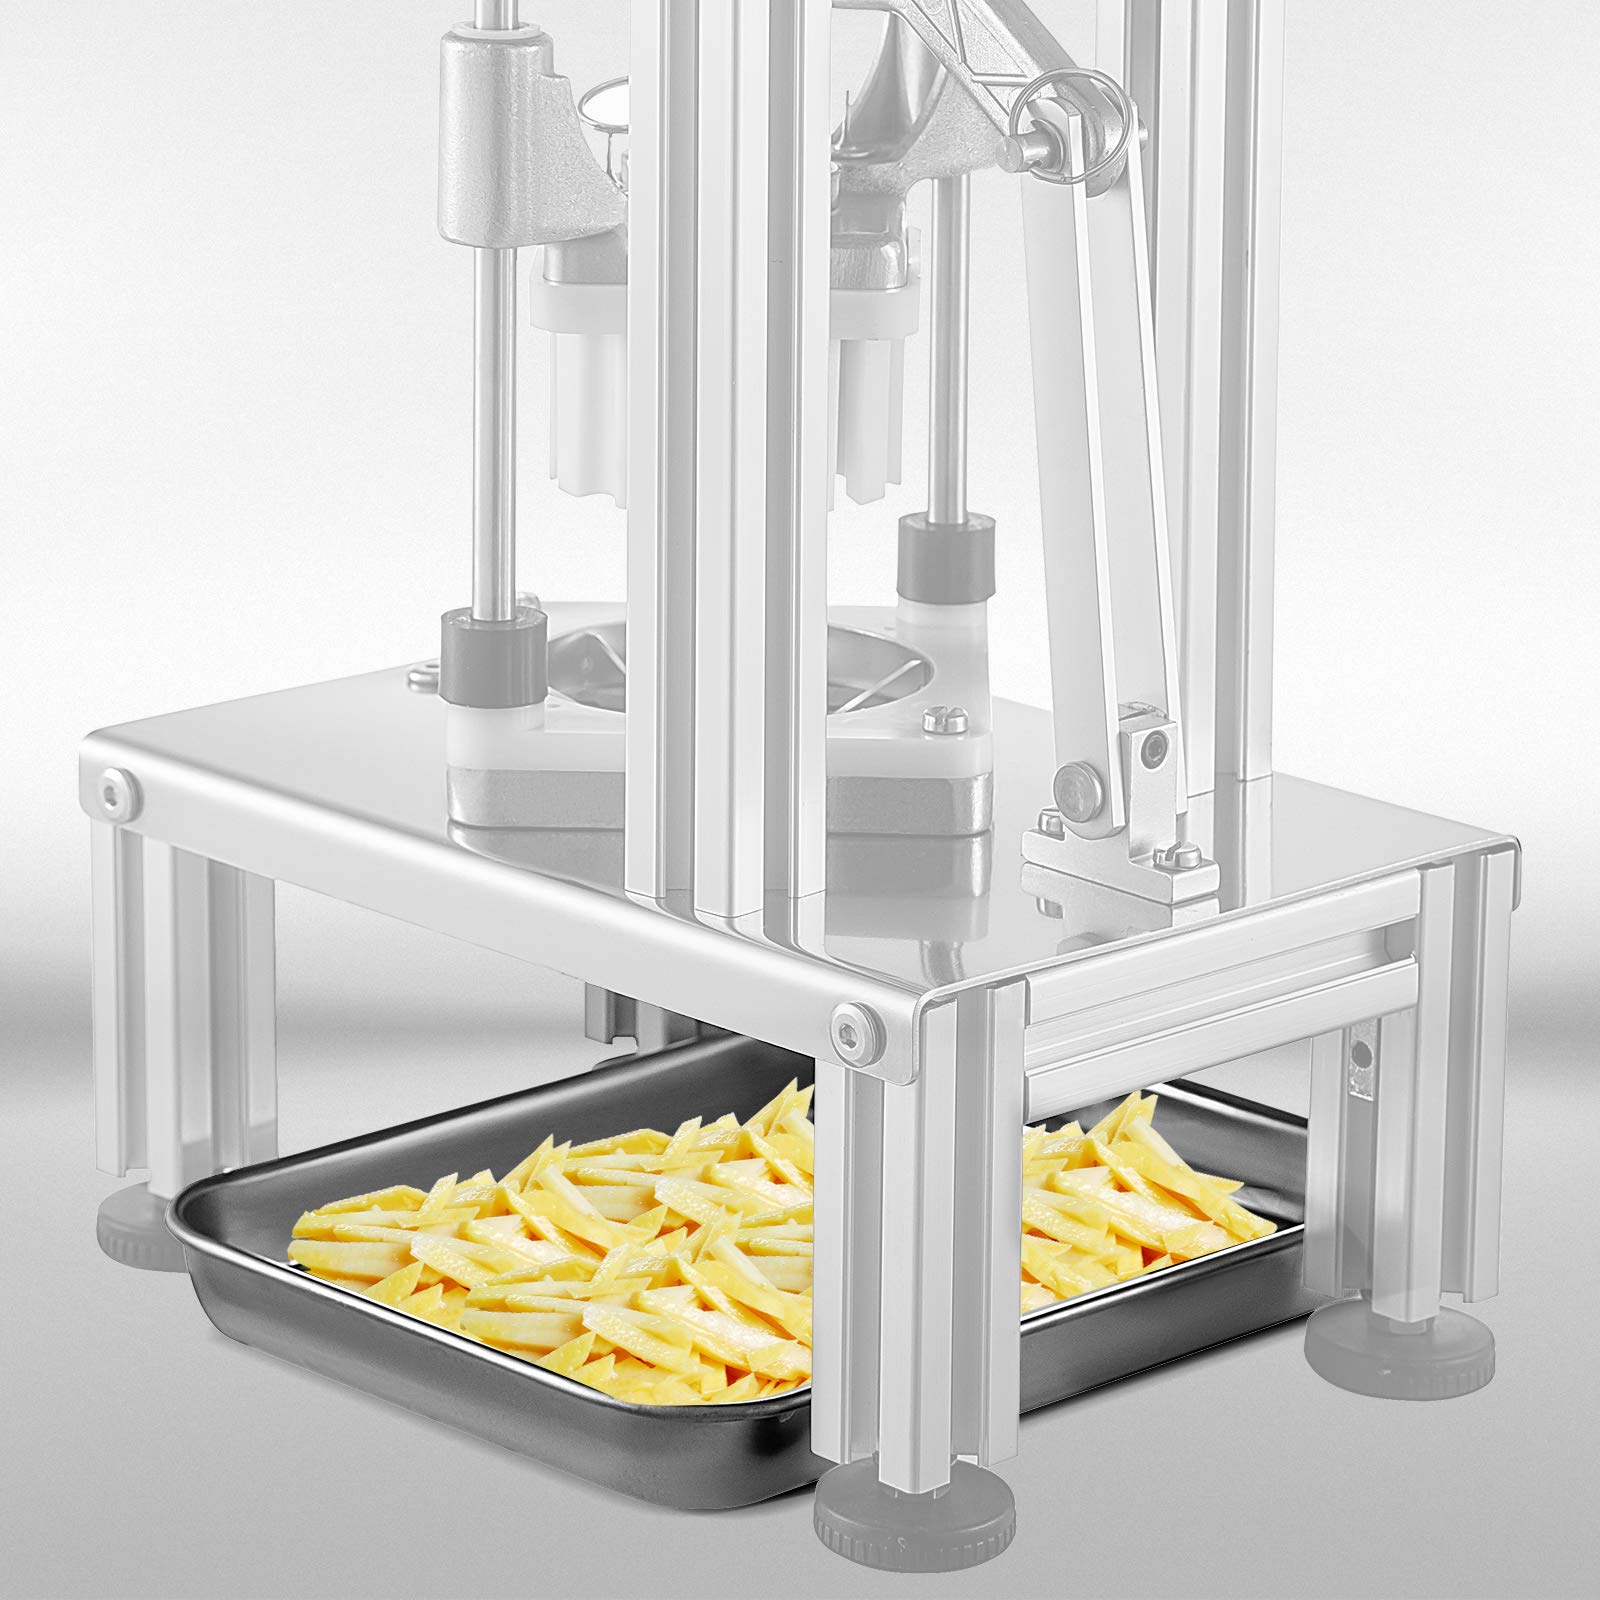 VEVOR Commercial Dicer of Vegetable Fruit in Stainless Steel and Aluminium, Cutter Attachment 4 Blades 1/4